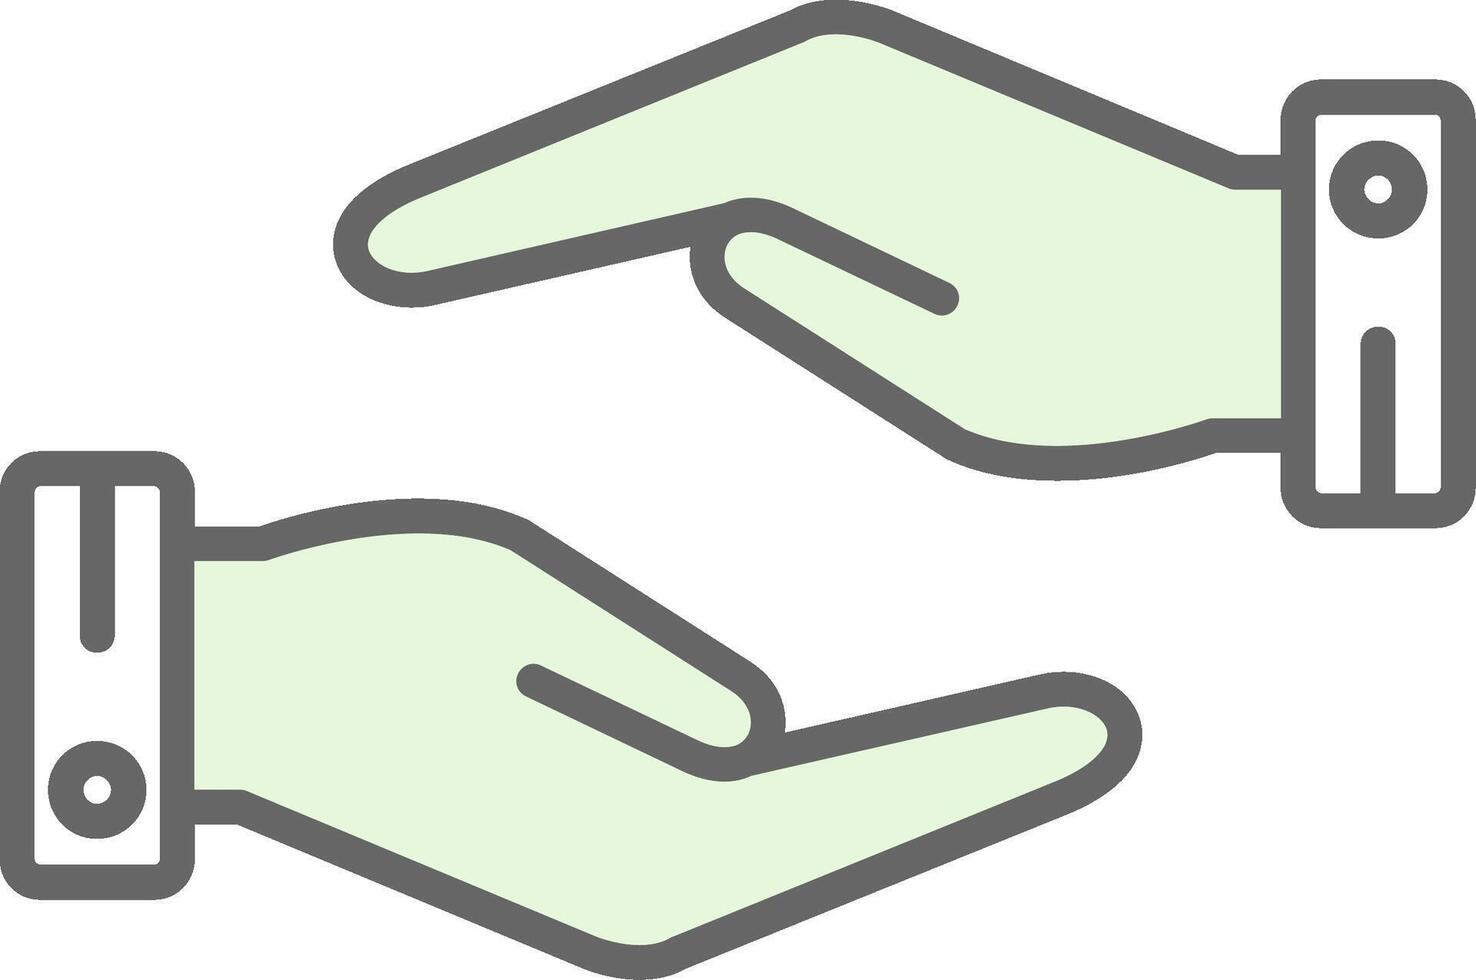 Support Hands Gesture Fillay Icon Design vector